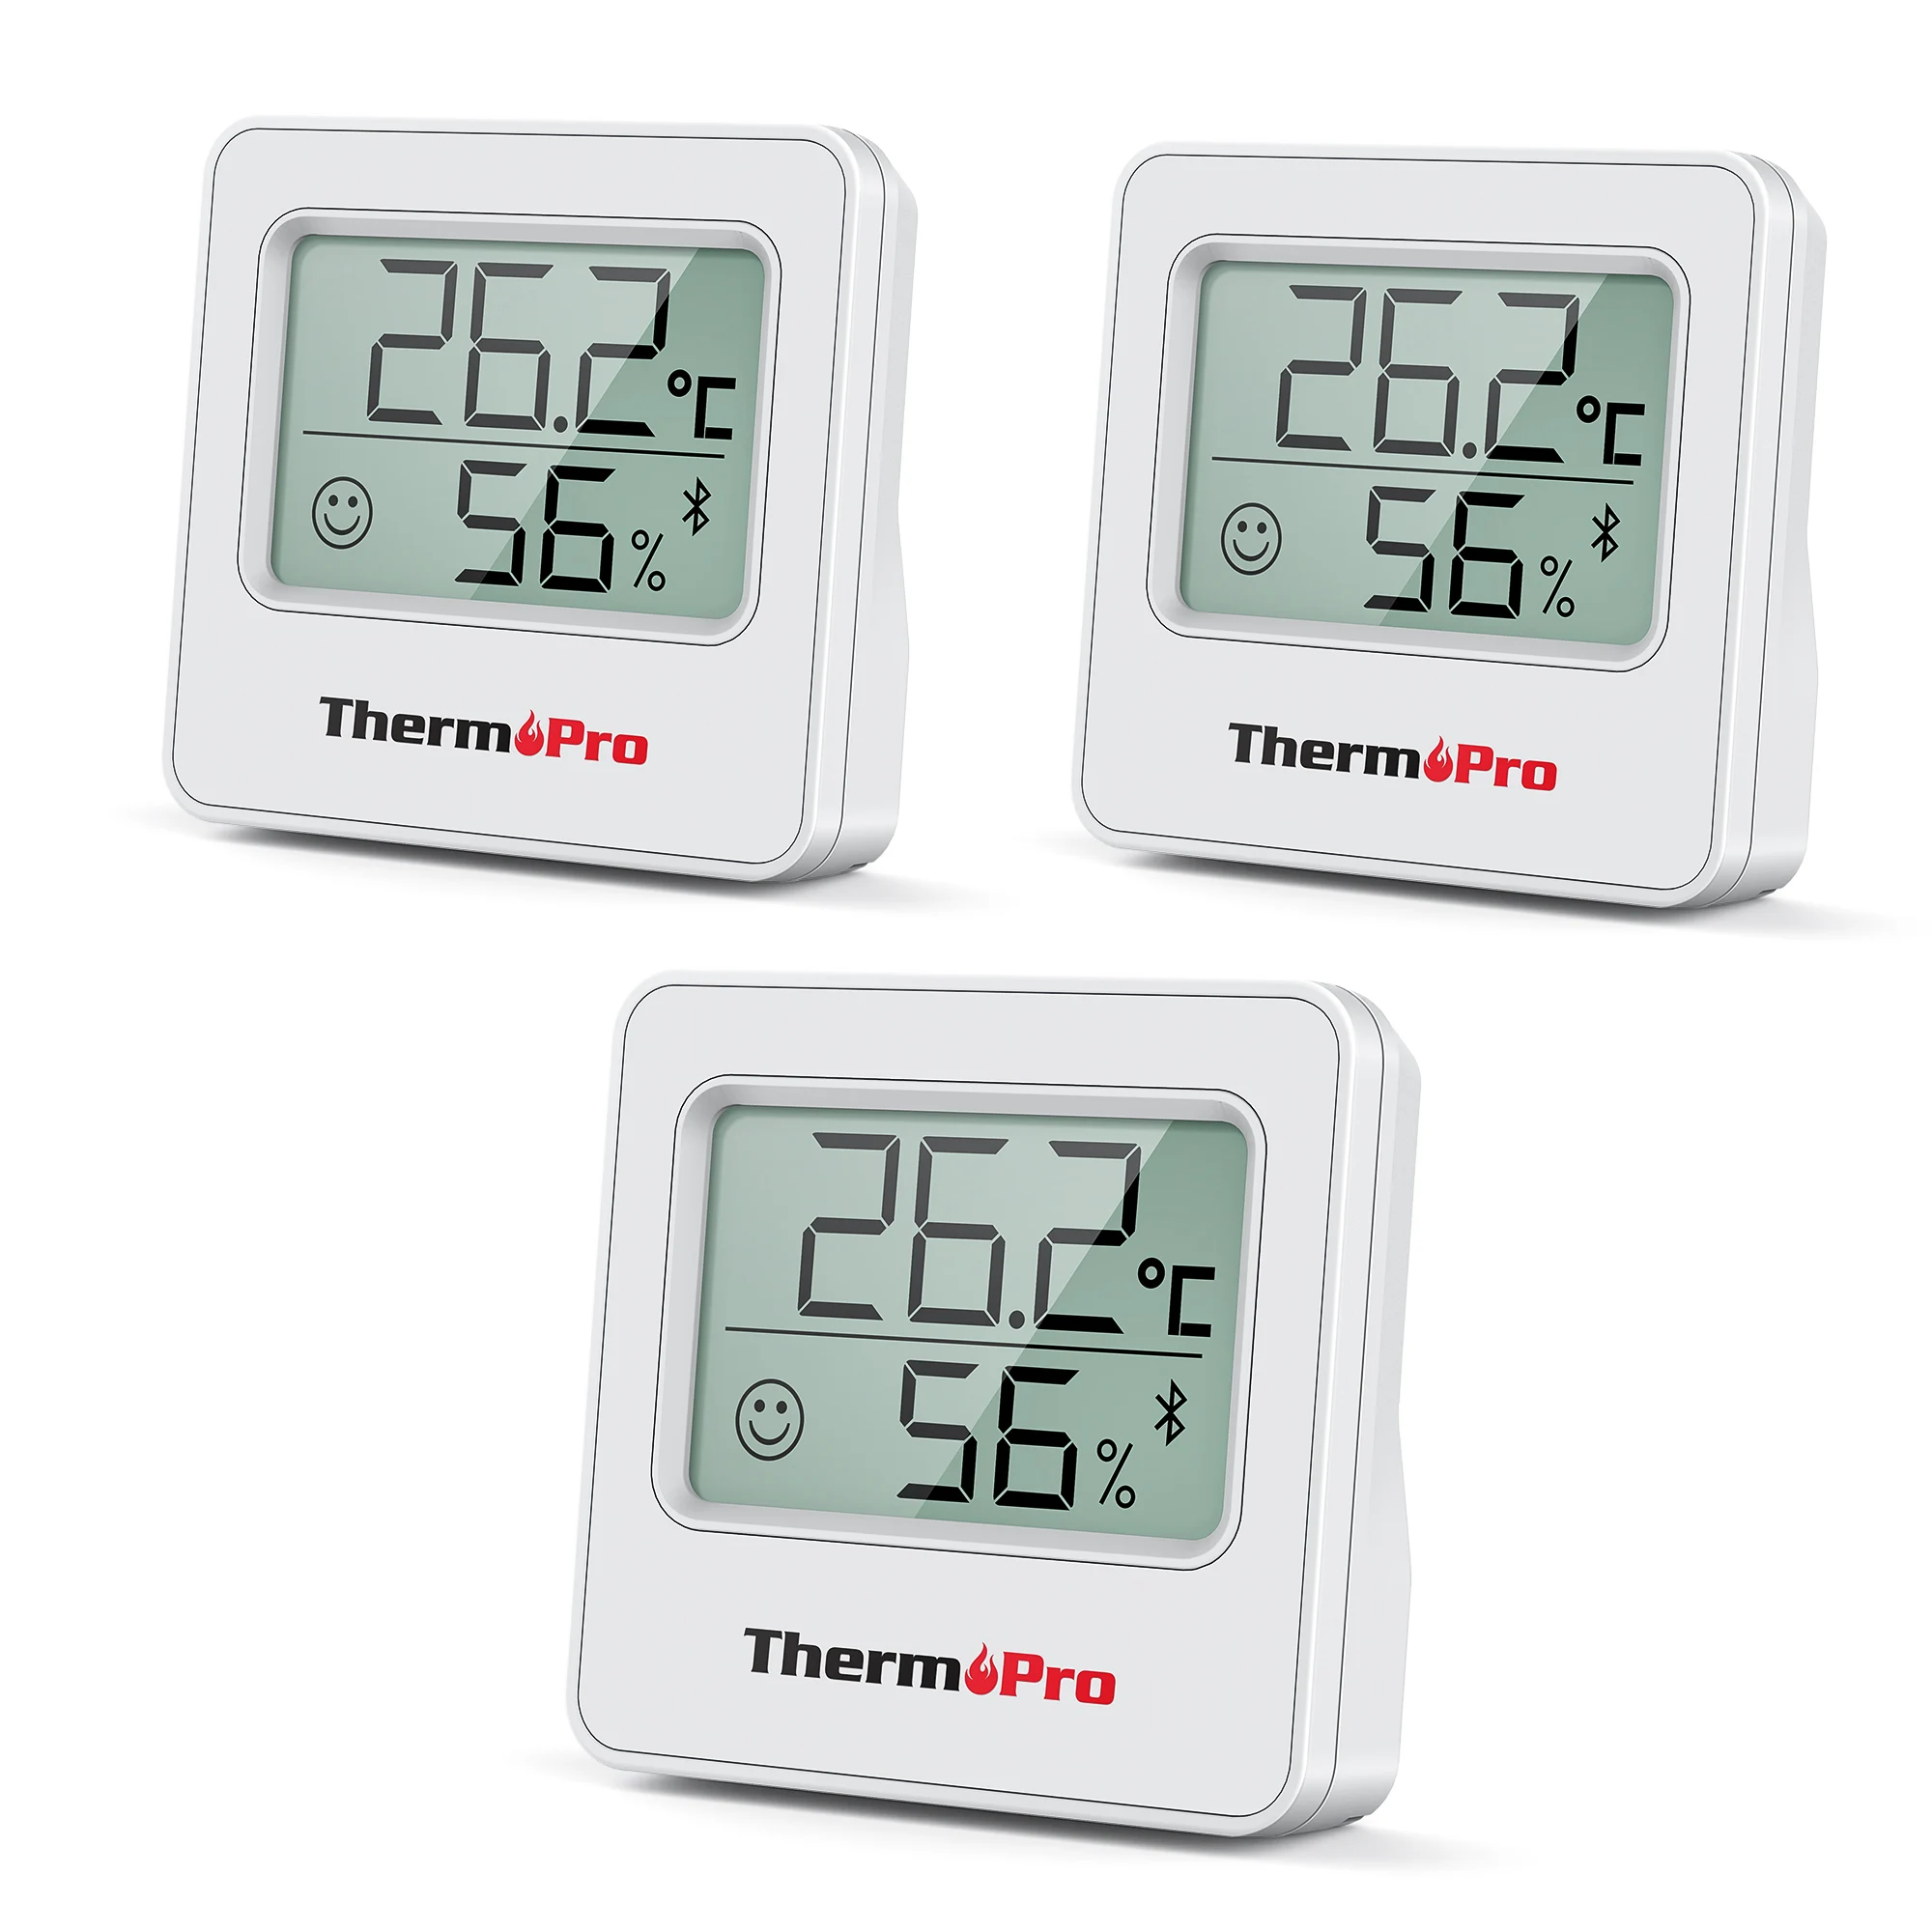 https://ae01.alicdn.com/kf/S0701a80217b5458681a16649ad074a1bj/ThermoPro-TP357-80M-Smart-Wireless-Digital-Thermometer-Hygrometer-Indoor-Mini-Room-Thermometer-Weather-Station-With-Data.jpg